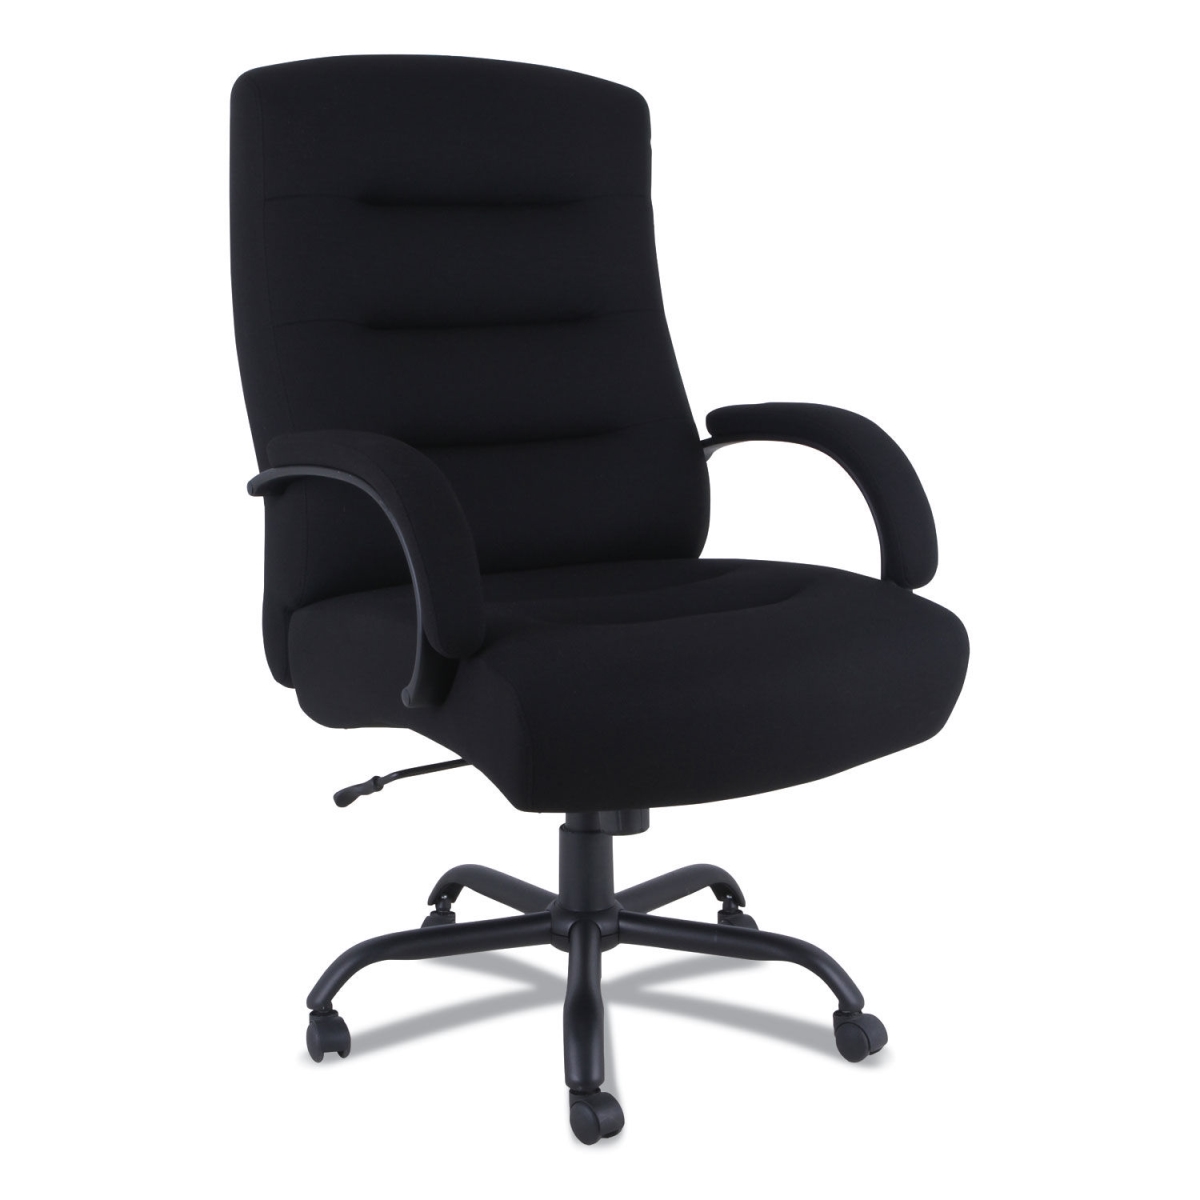 Alera Ks4510 24.8 In. Seat Height Kesson Series Big & Tall Office Chair With Black Seat & Back